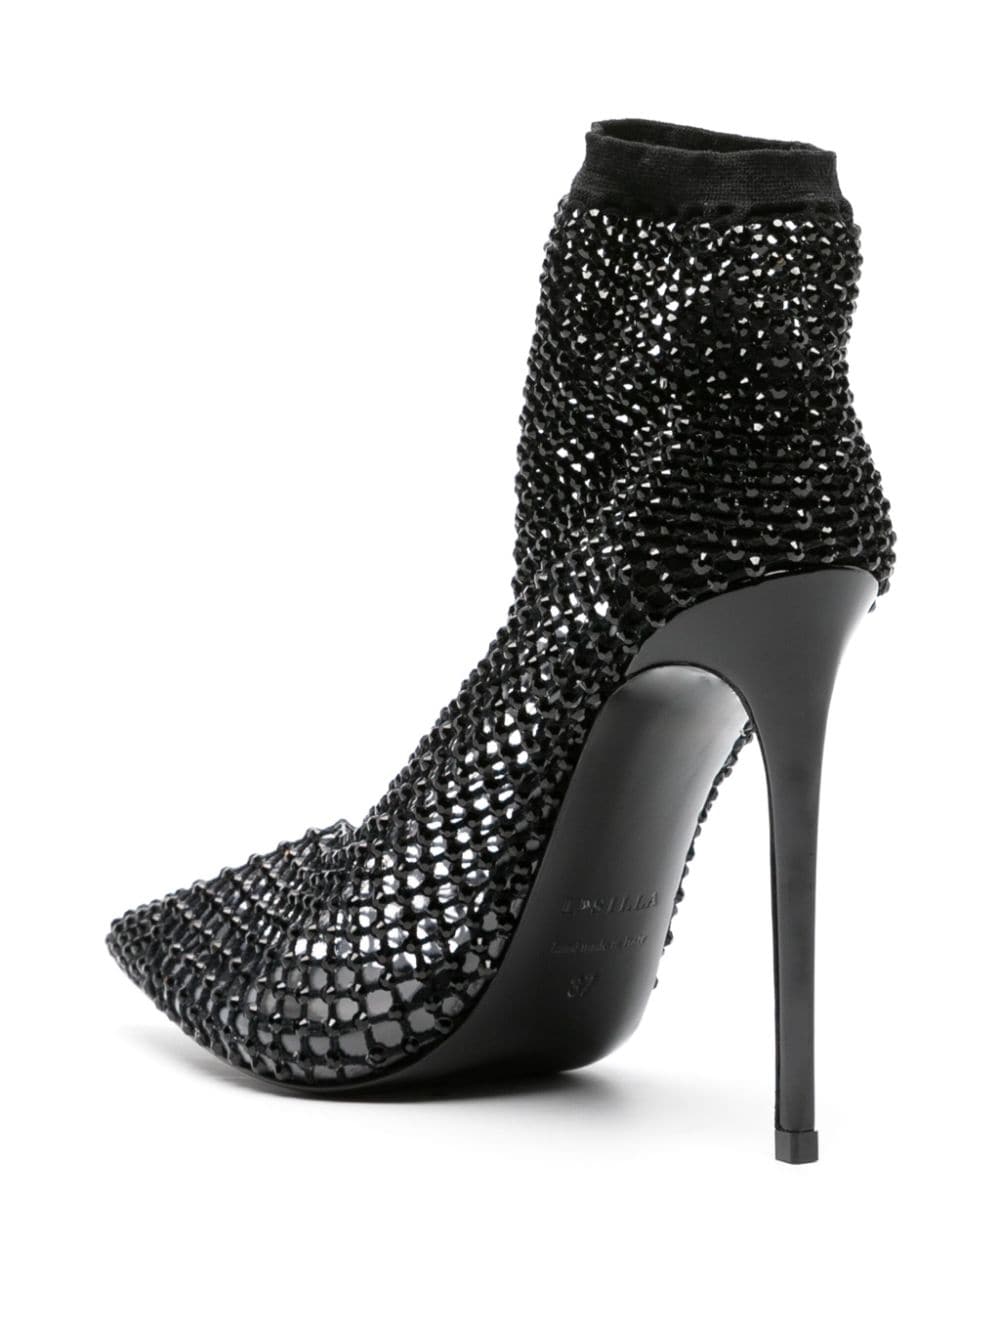 Shop Le Silla Gilda 120mm Ankle Boots In Black